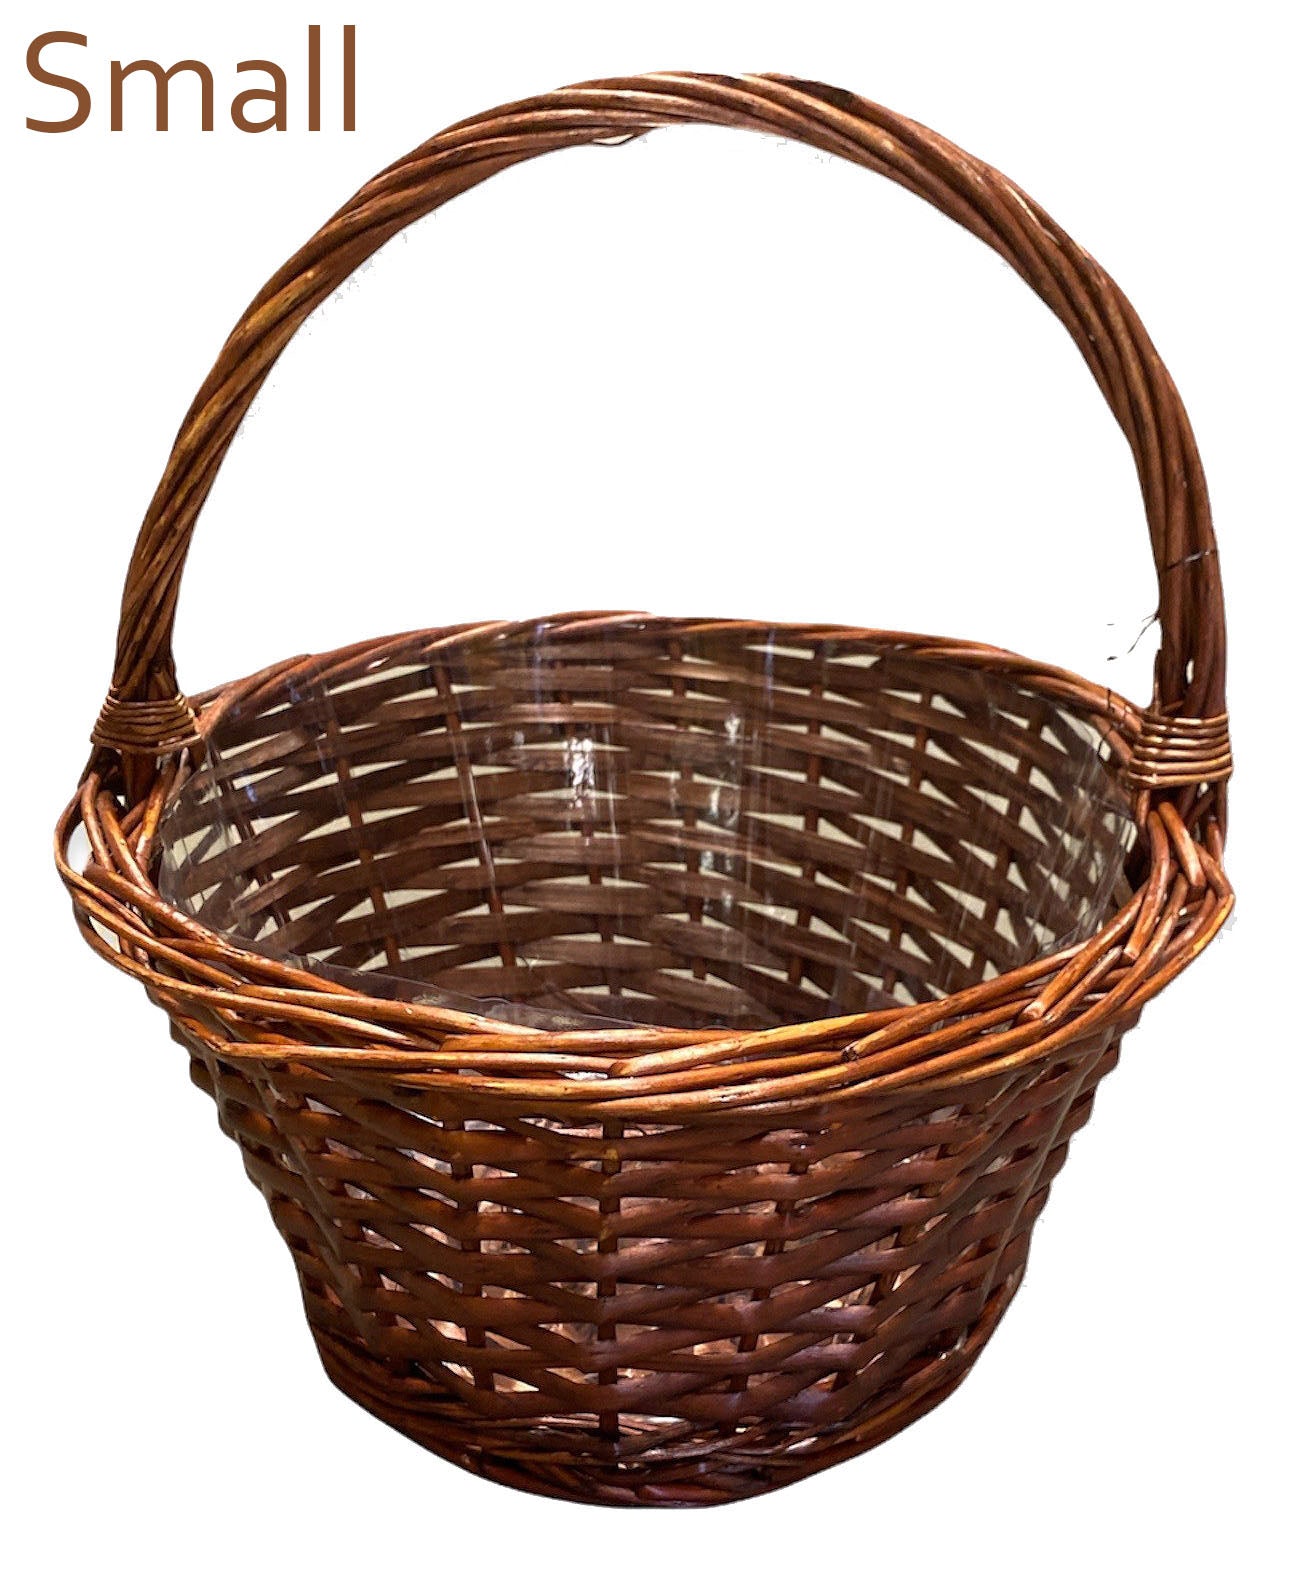 Round Split Willow Baskets with hard liners - Small 10.36 x 5.5 inch deep - NEW222